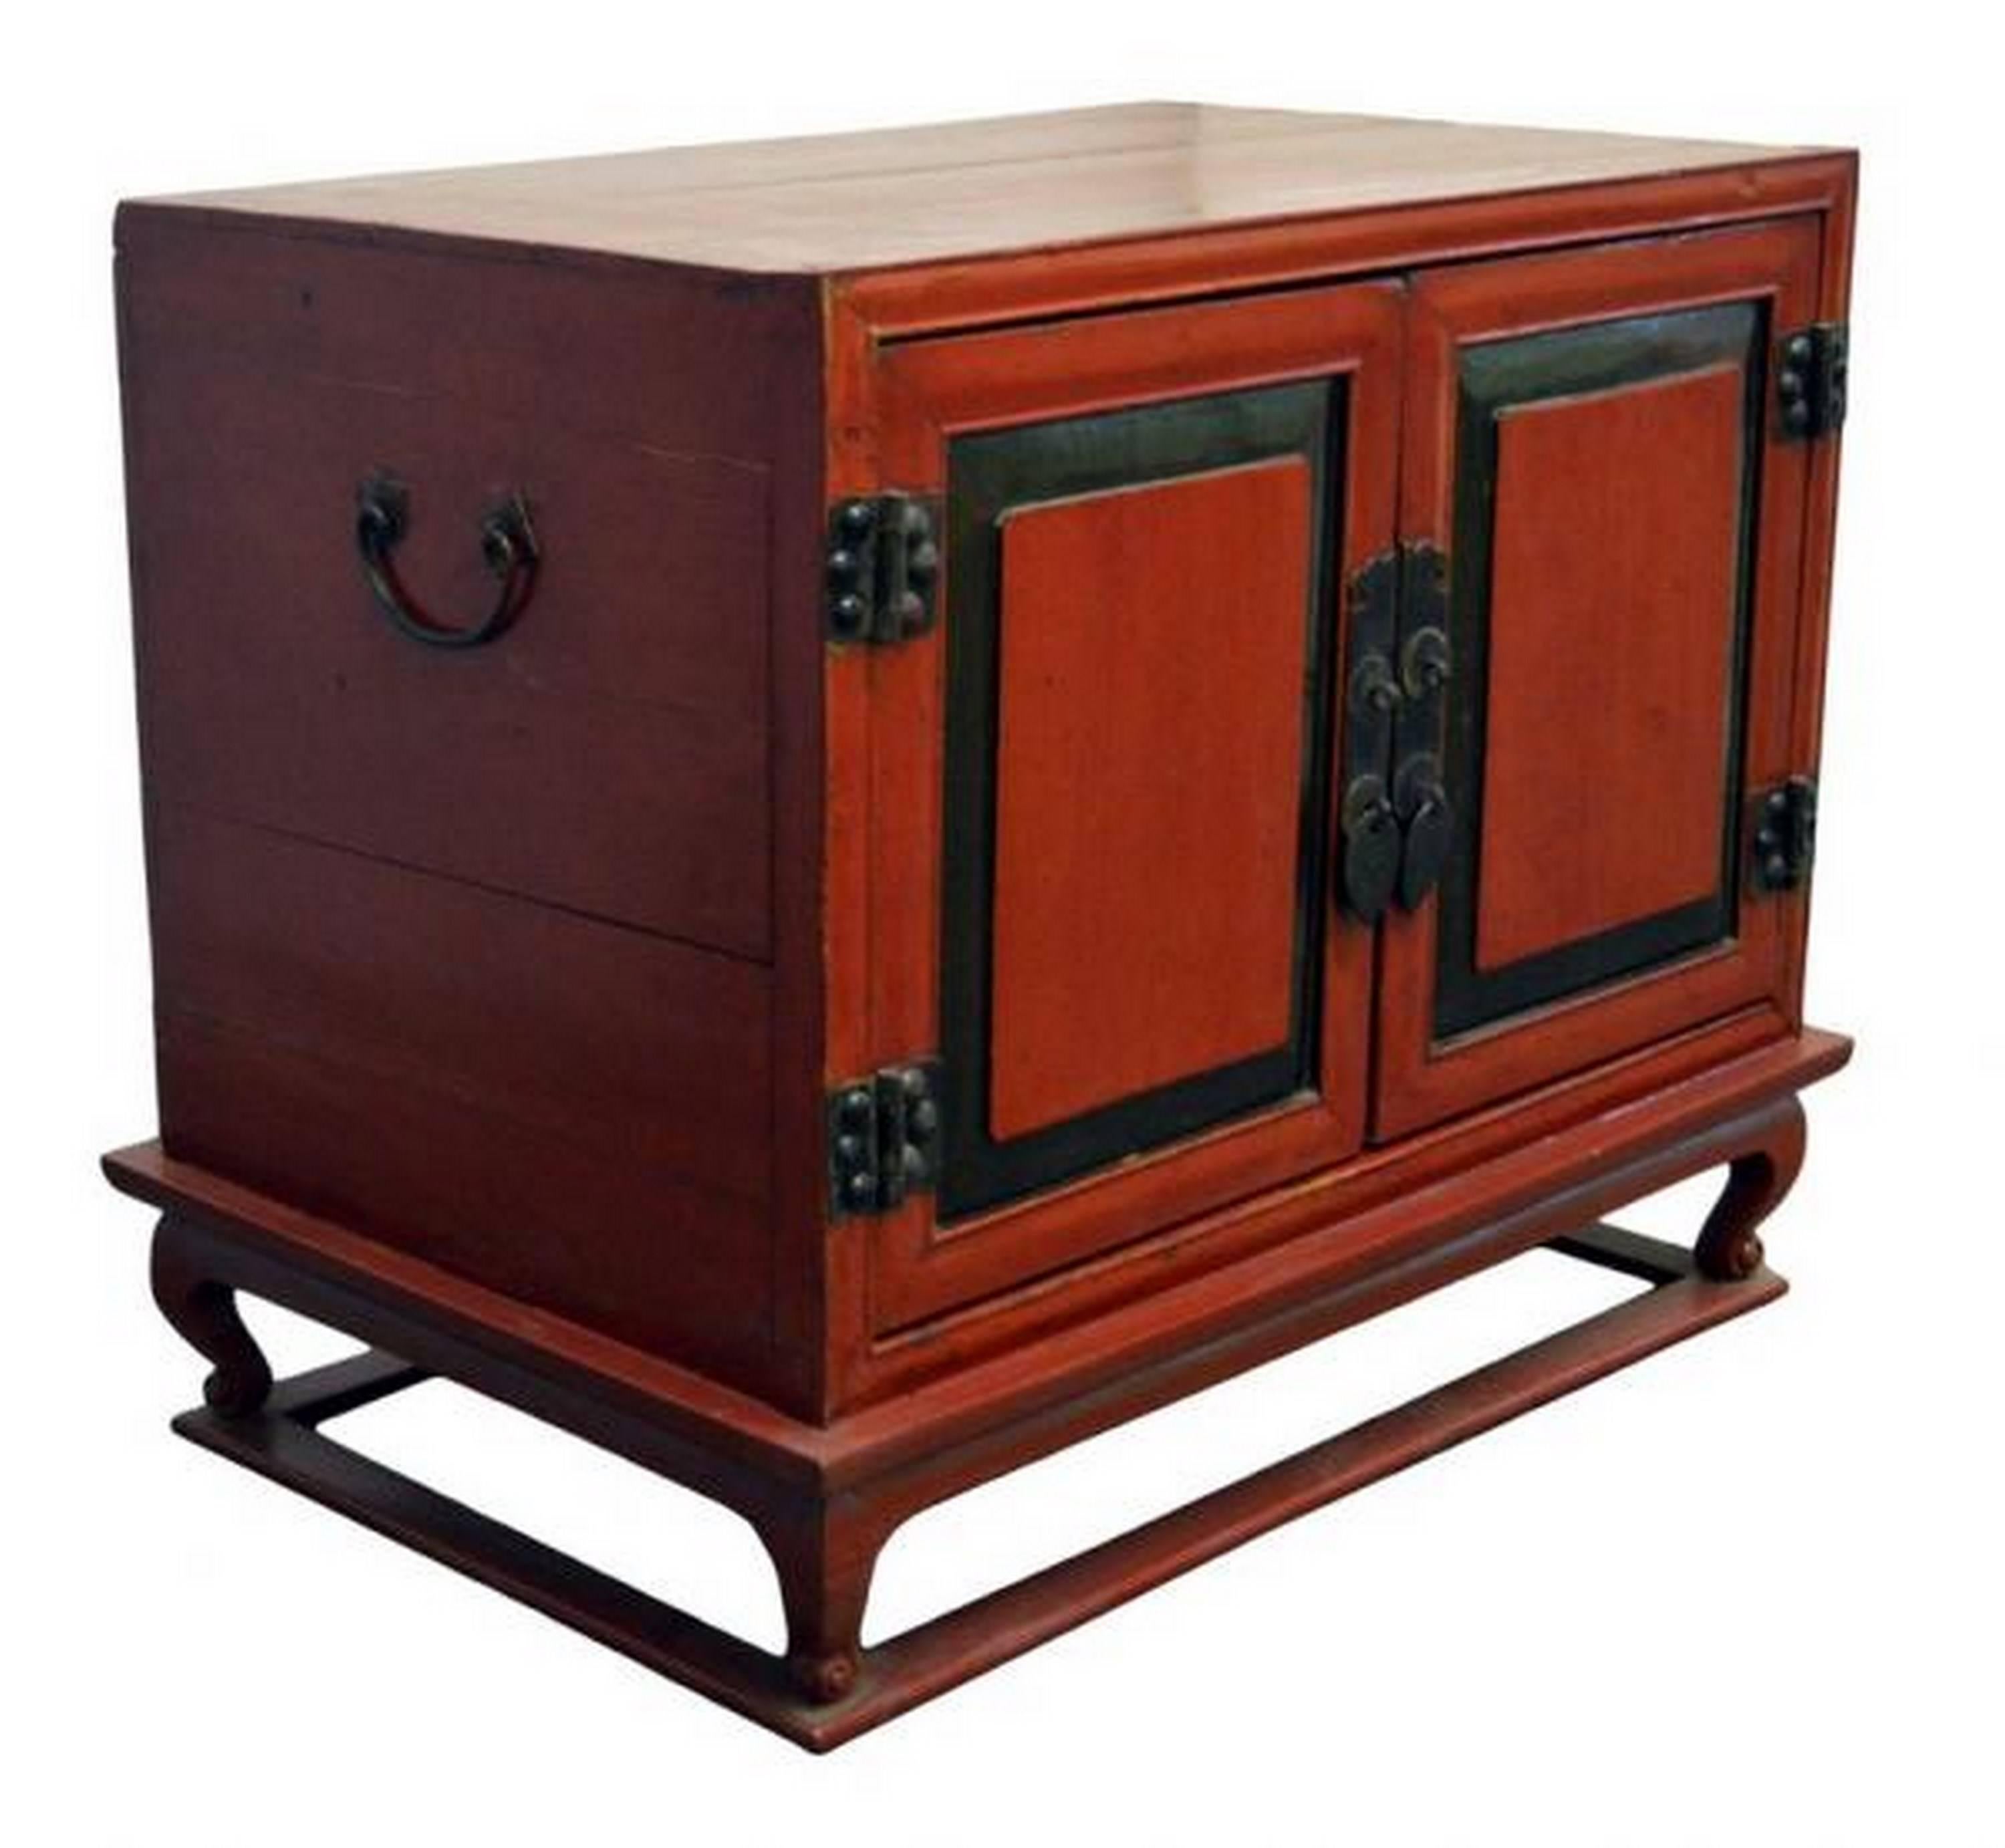 A mid-19th century Chinese bedside cabinet with red lacquered wood and brass hardware. This cabinet is made of a rectangular cabinet sitting on a base connected by four curved legs. Made of red lacquered wood, this cabinet features two doors adorned